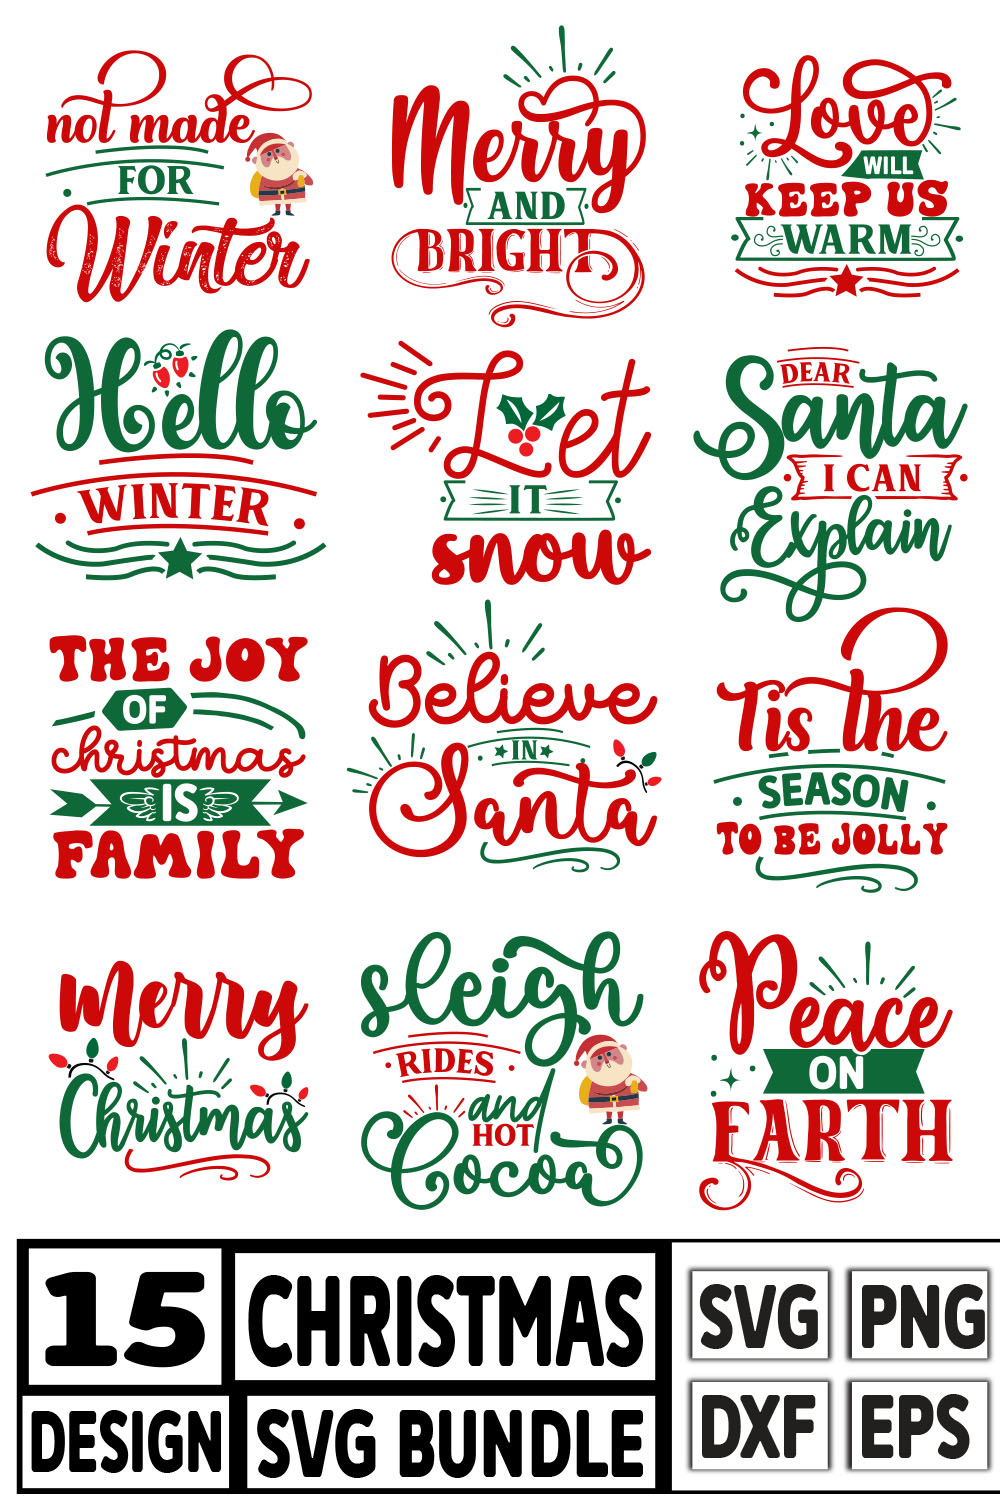 Pack of enchanting images for prints on the theme of Christmas.